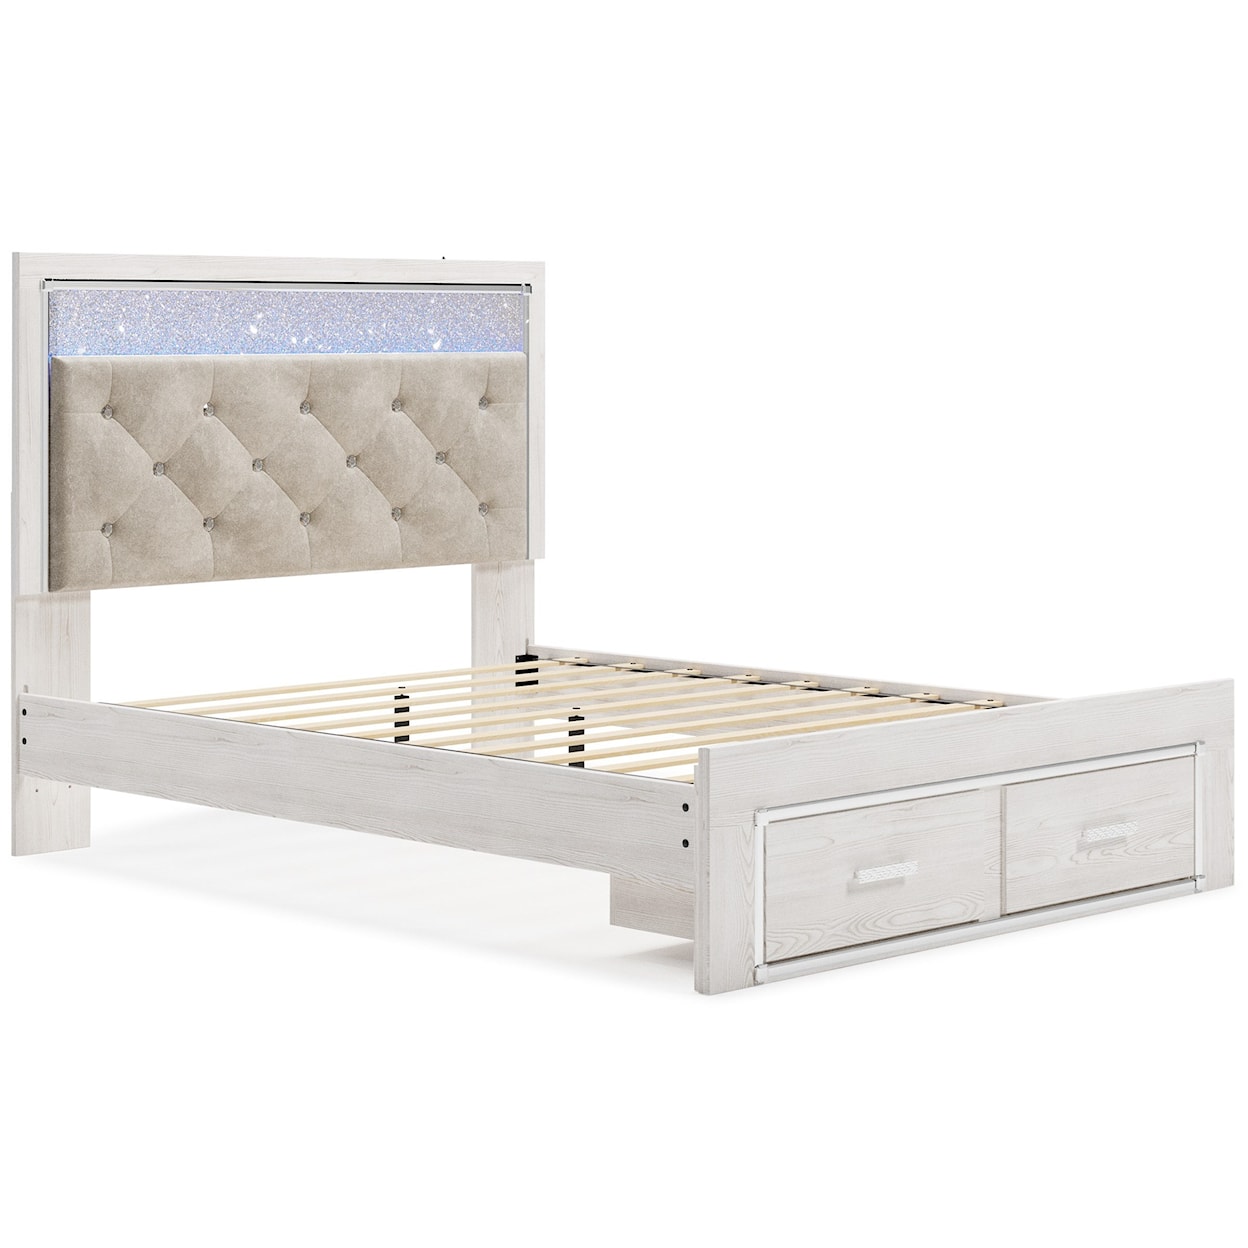 Signature Design Altyra Queen Storage Bed with Upholstered Headboard